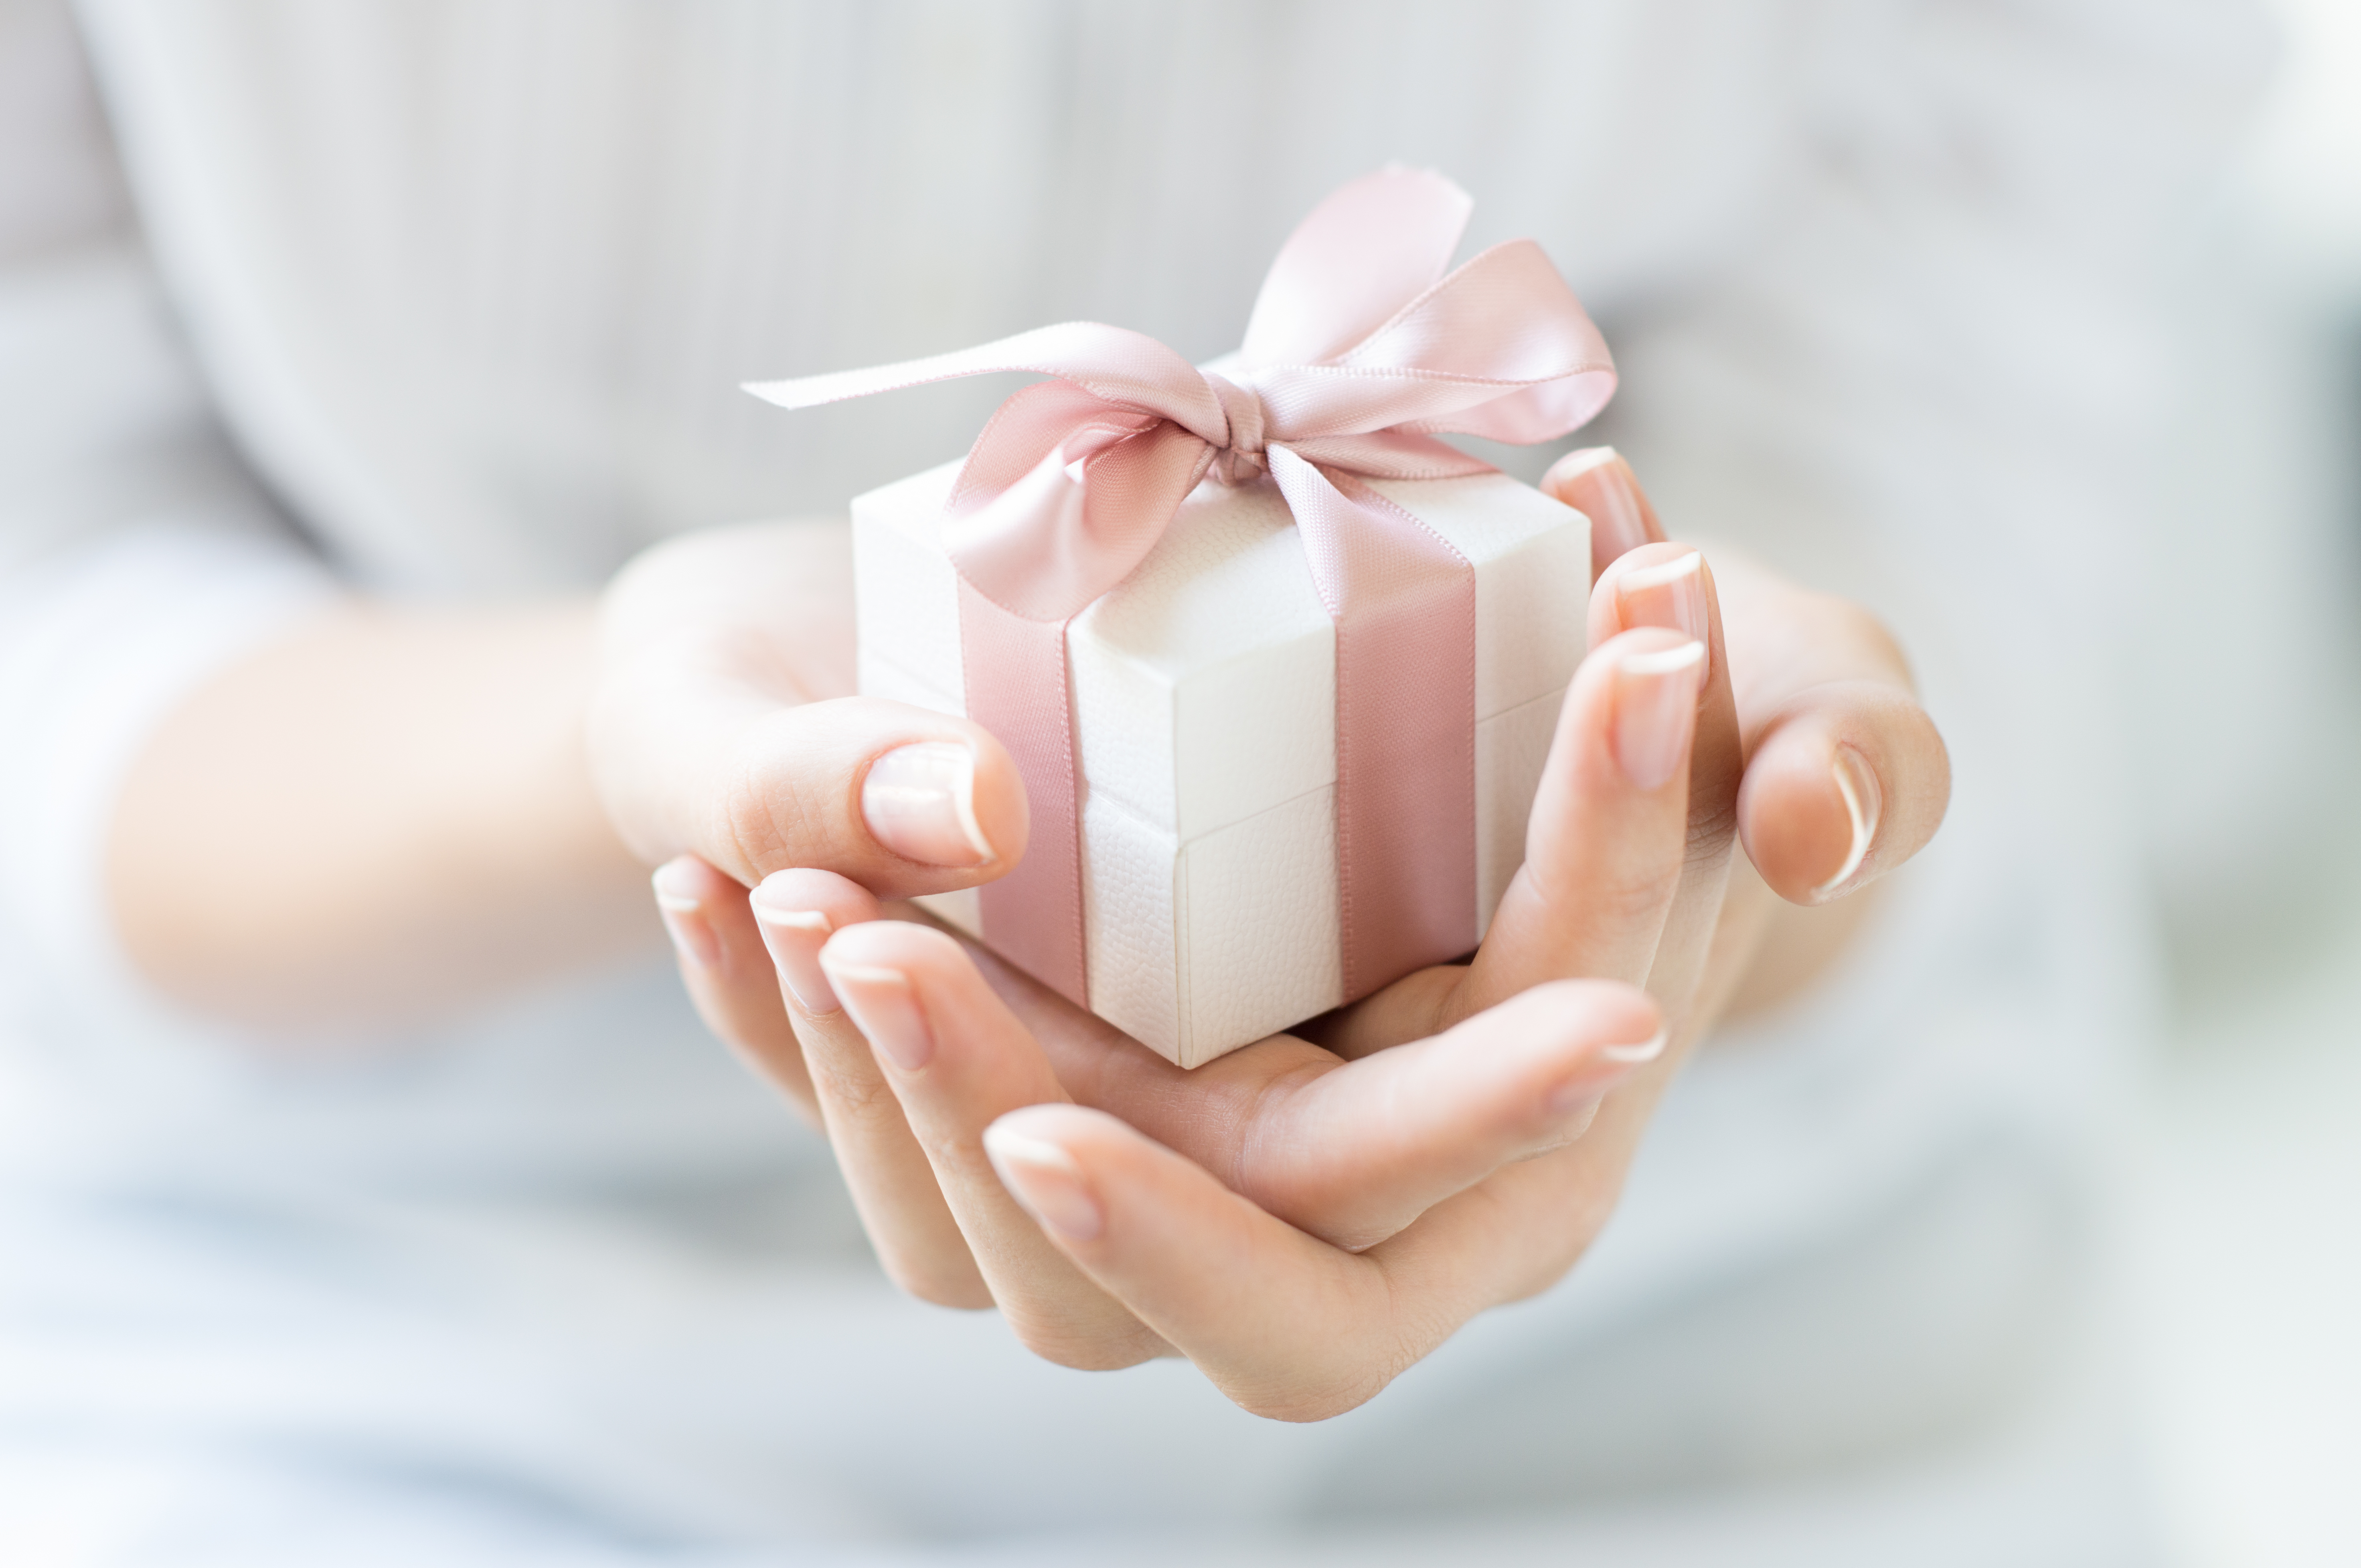 Close-up of a woman holding a gift | Source: Shutterstock